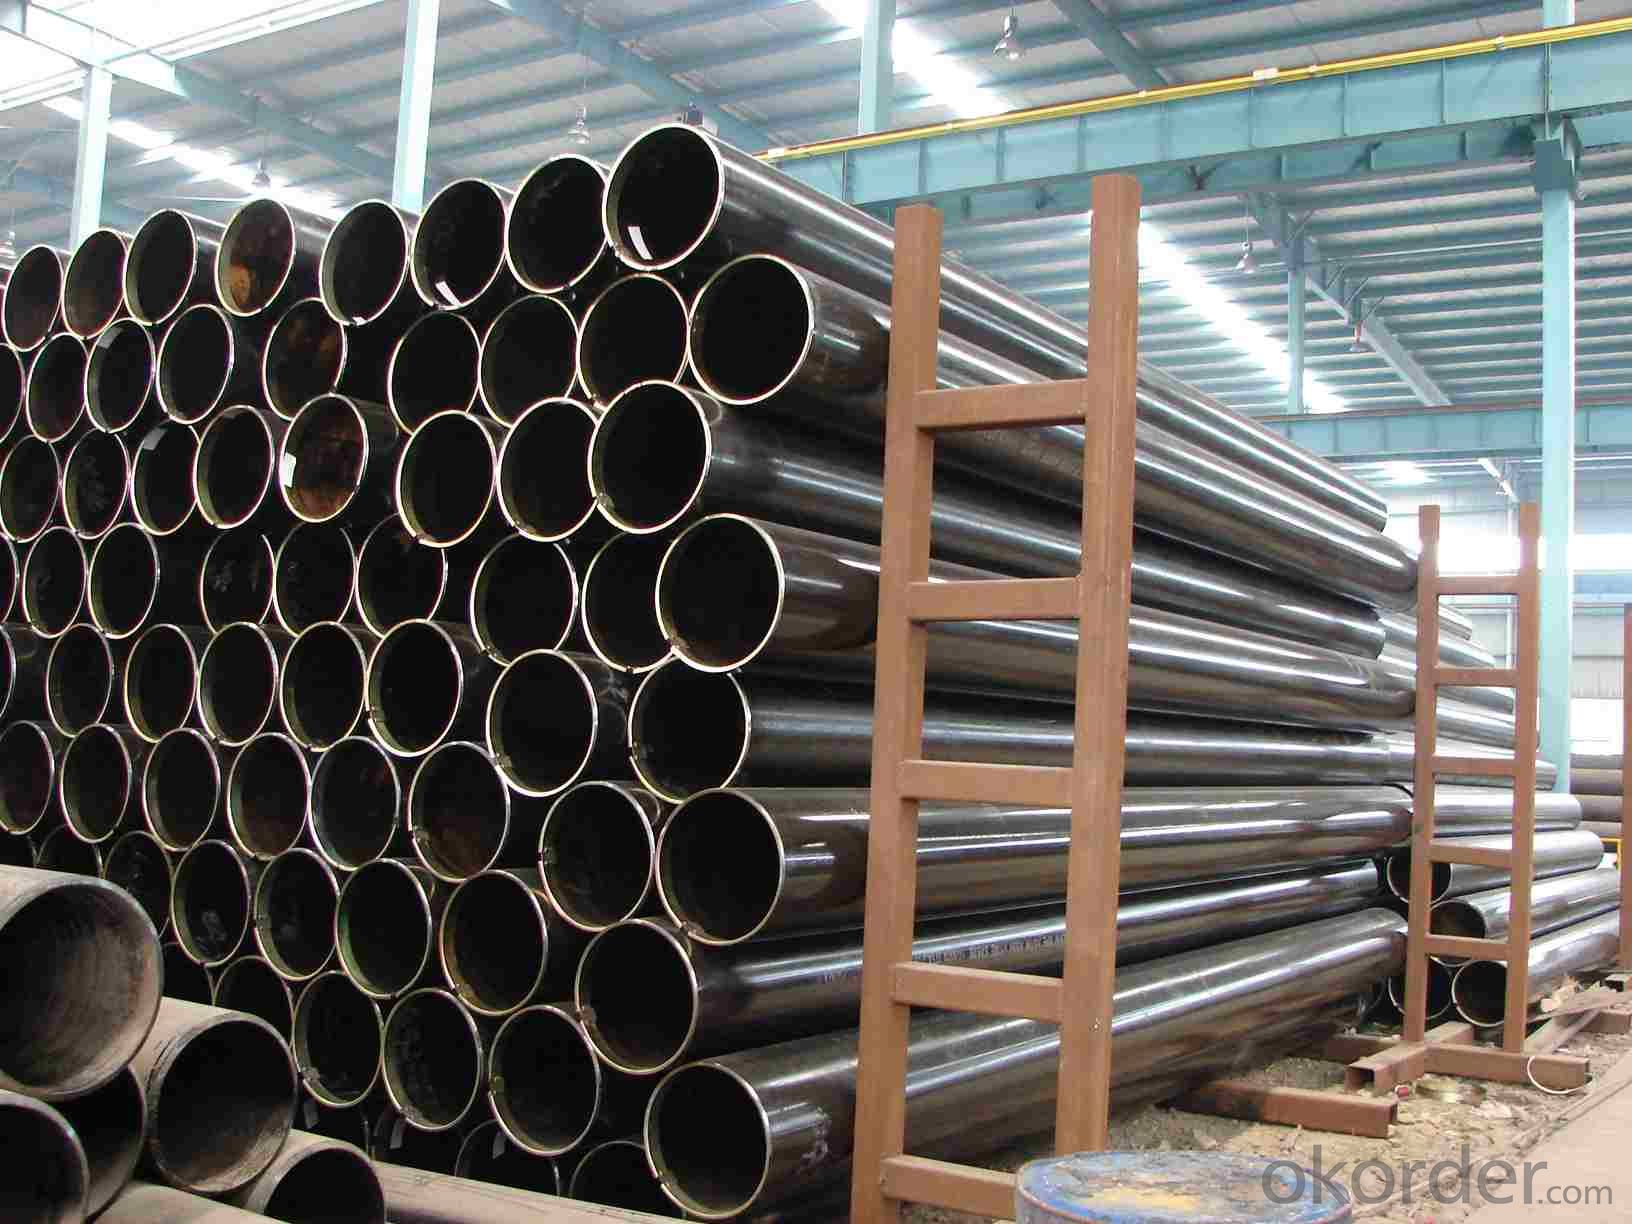 Welded  Steel  Pipe  Production  Serious